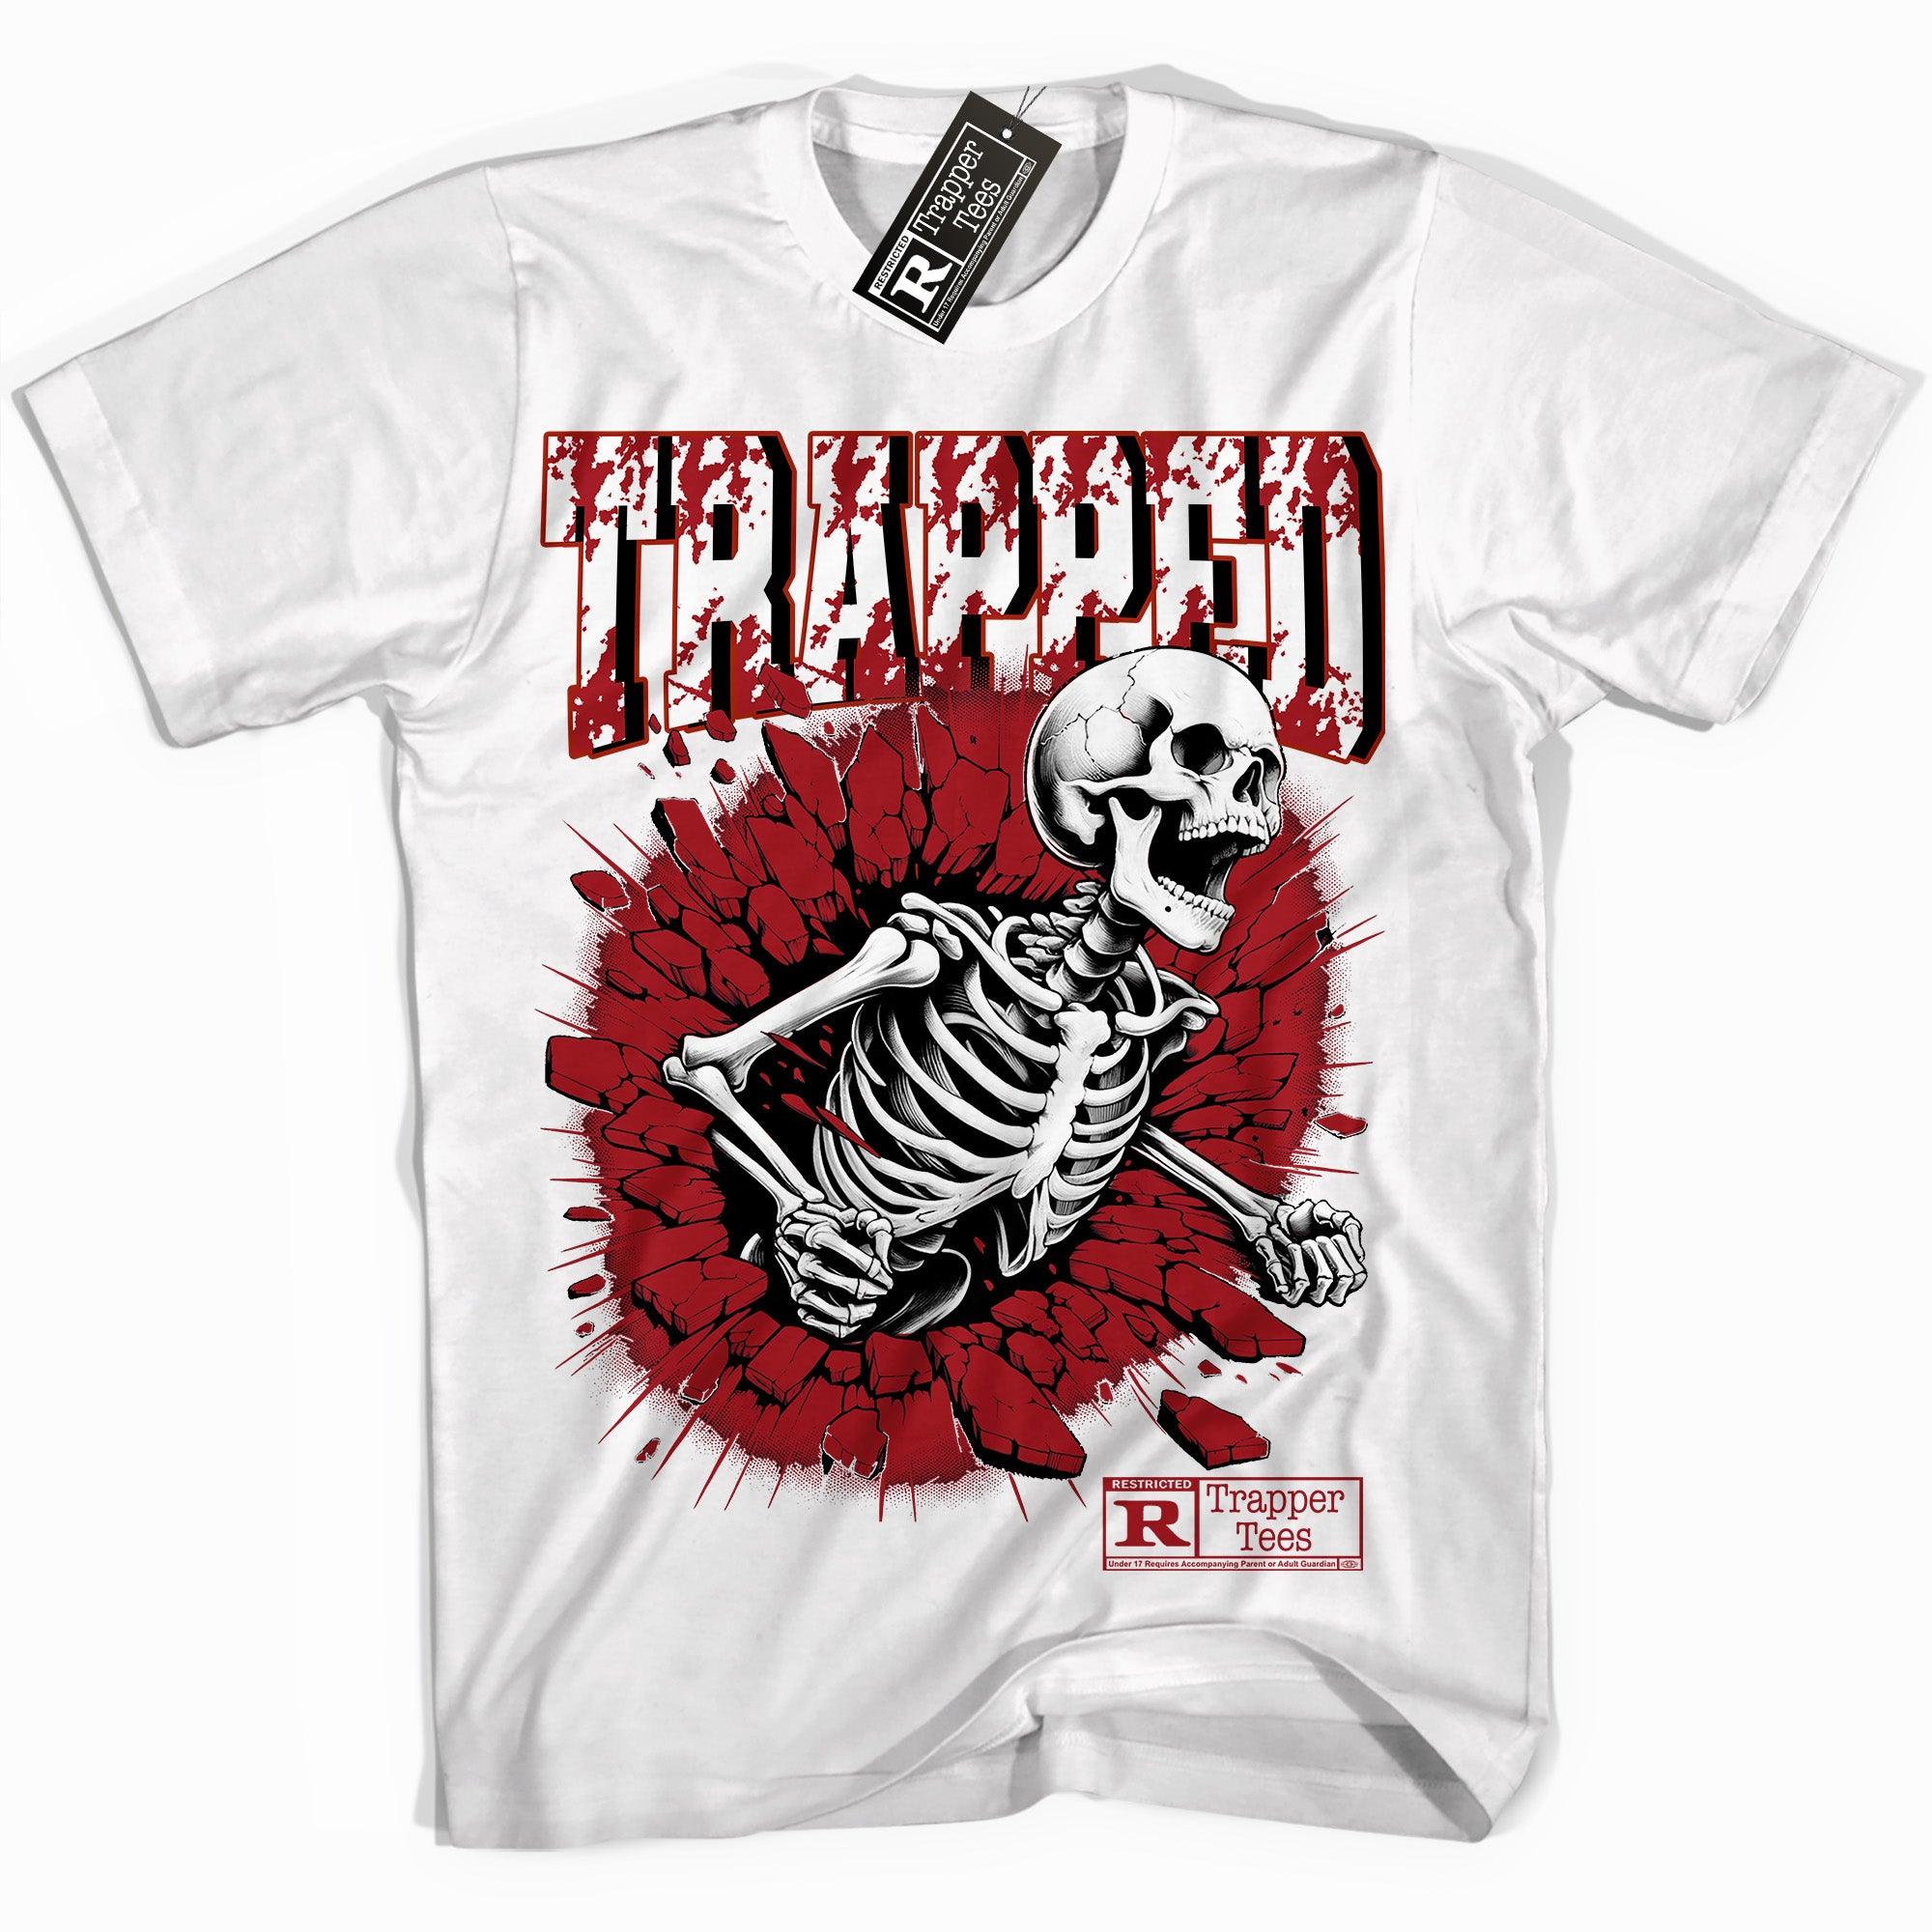 Cool White graphic tee with “ Trapped Skull ” print, that perfectly matches Air Jordan 12 Cherry sneakers 